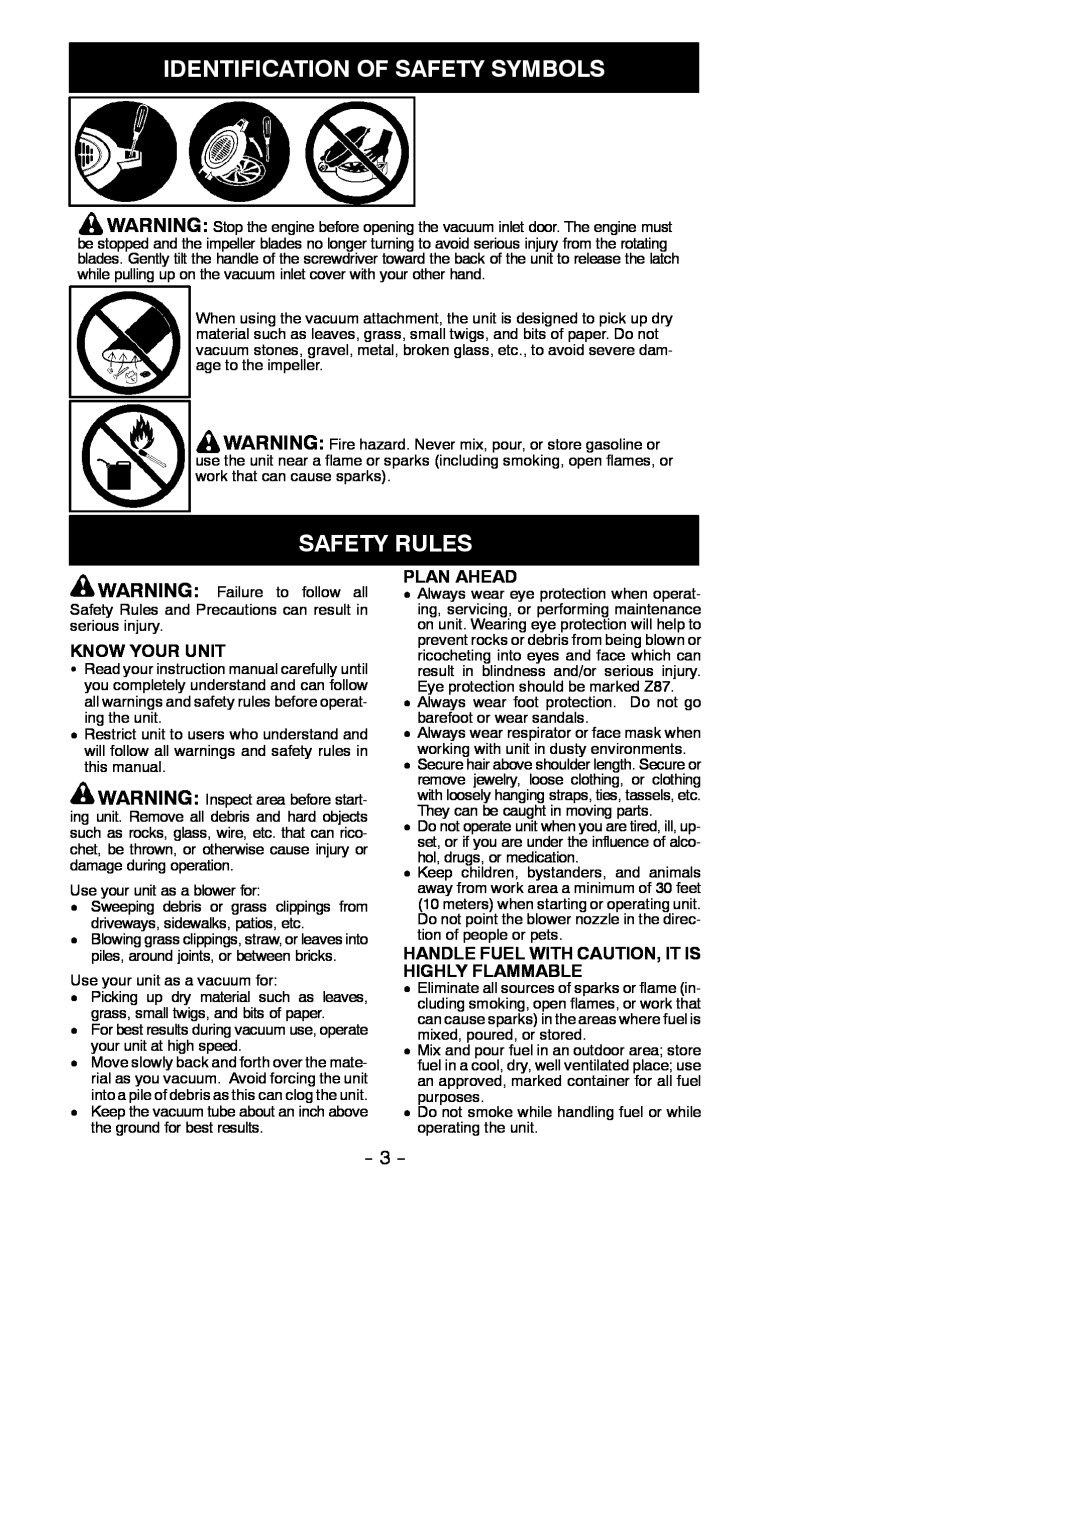 Poulan BV200, BV1650, BV1800, BV1850, BV2000 LE Series Safety Rules, Identification Of Safety Symbols, Know Your Unit 